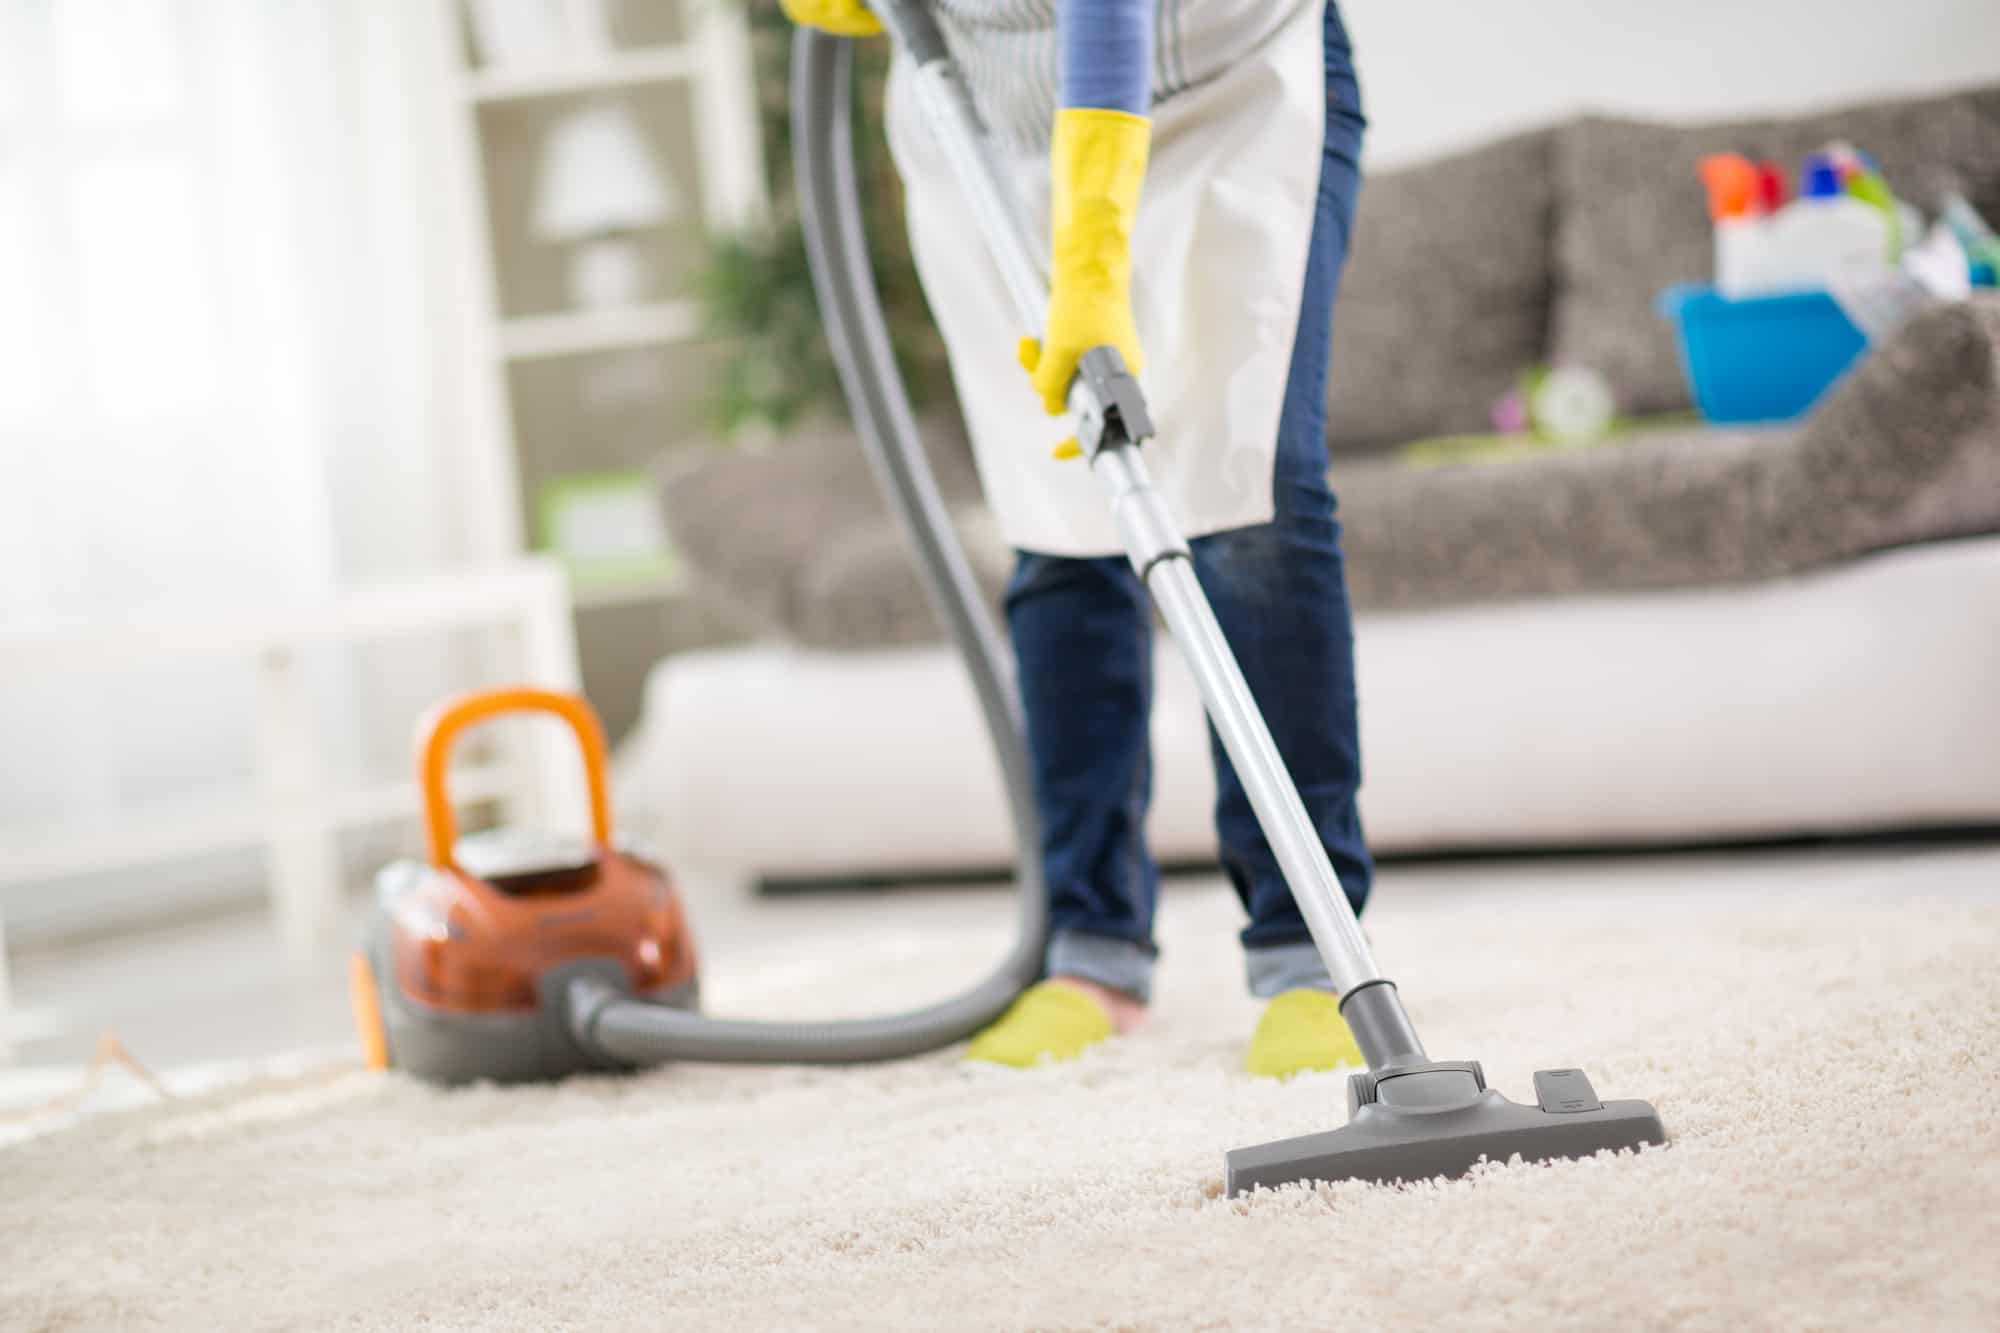 Woman with an apron on vaccuming a carpet at home.